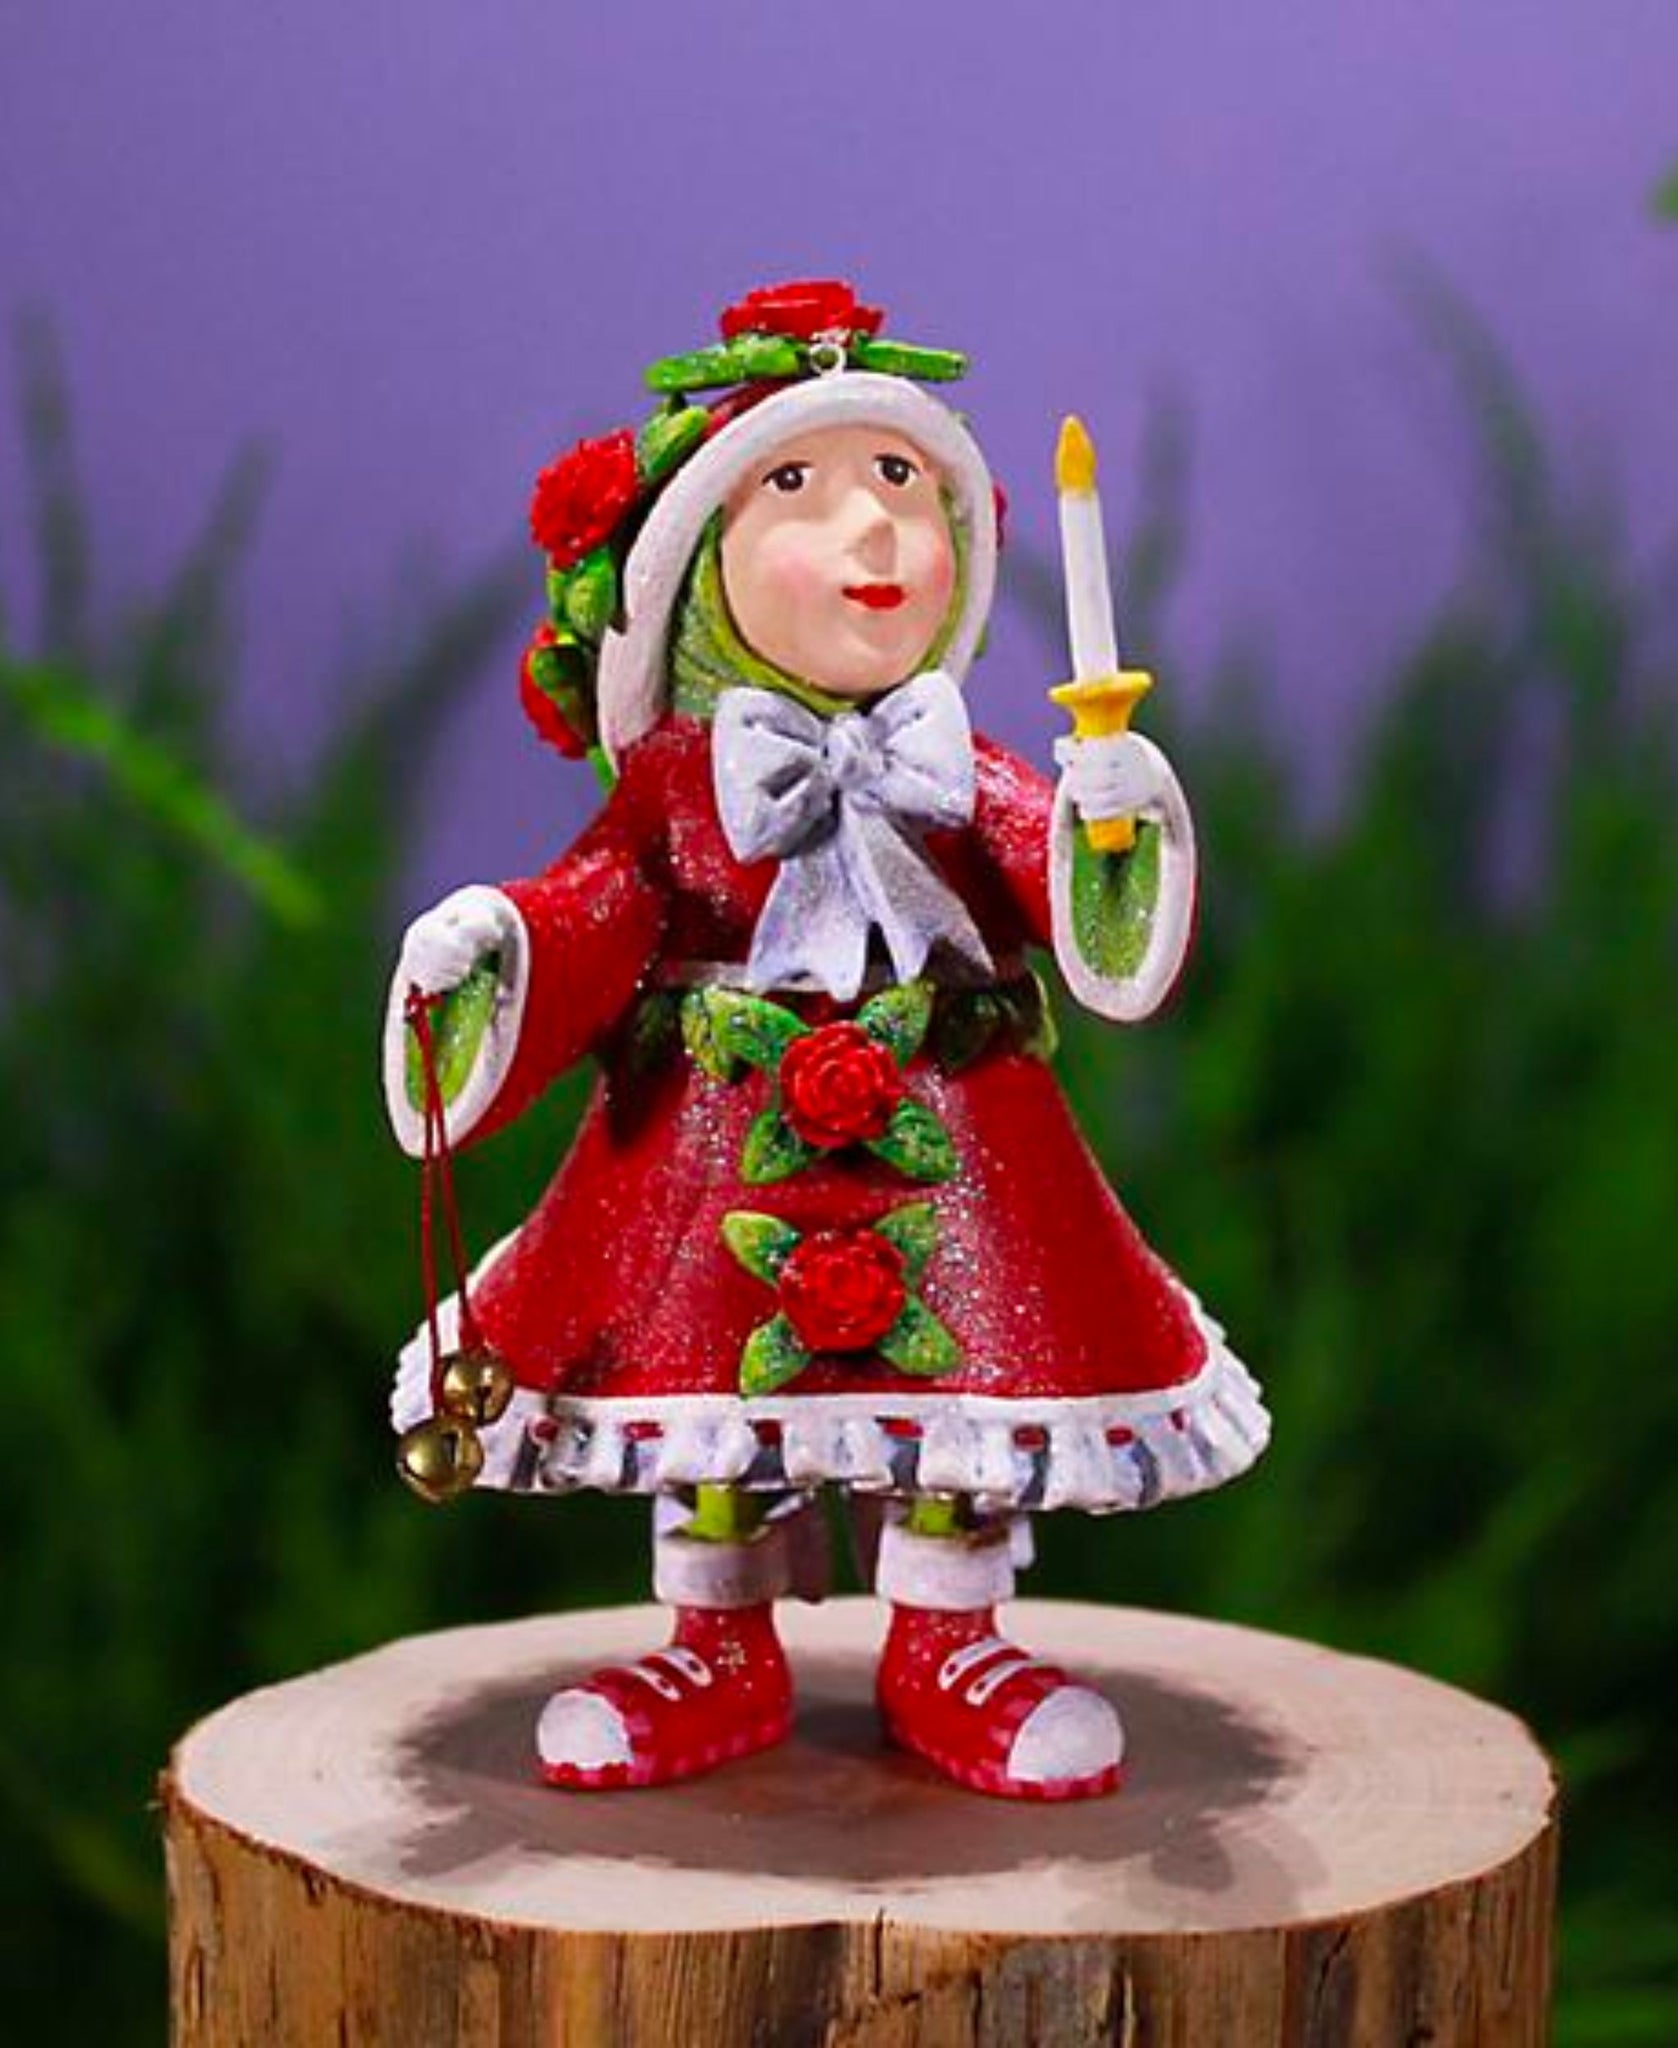 Shop by Category - Figurines & Collectibles - Patience Brewster